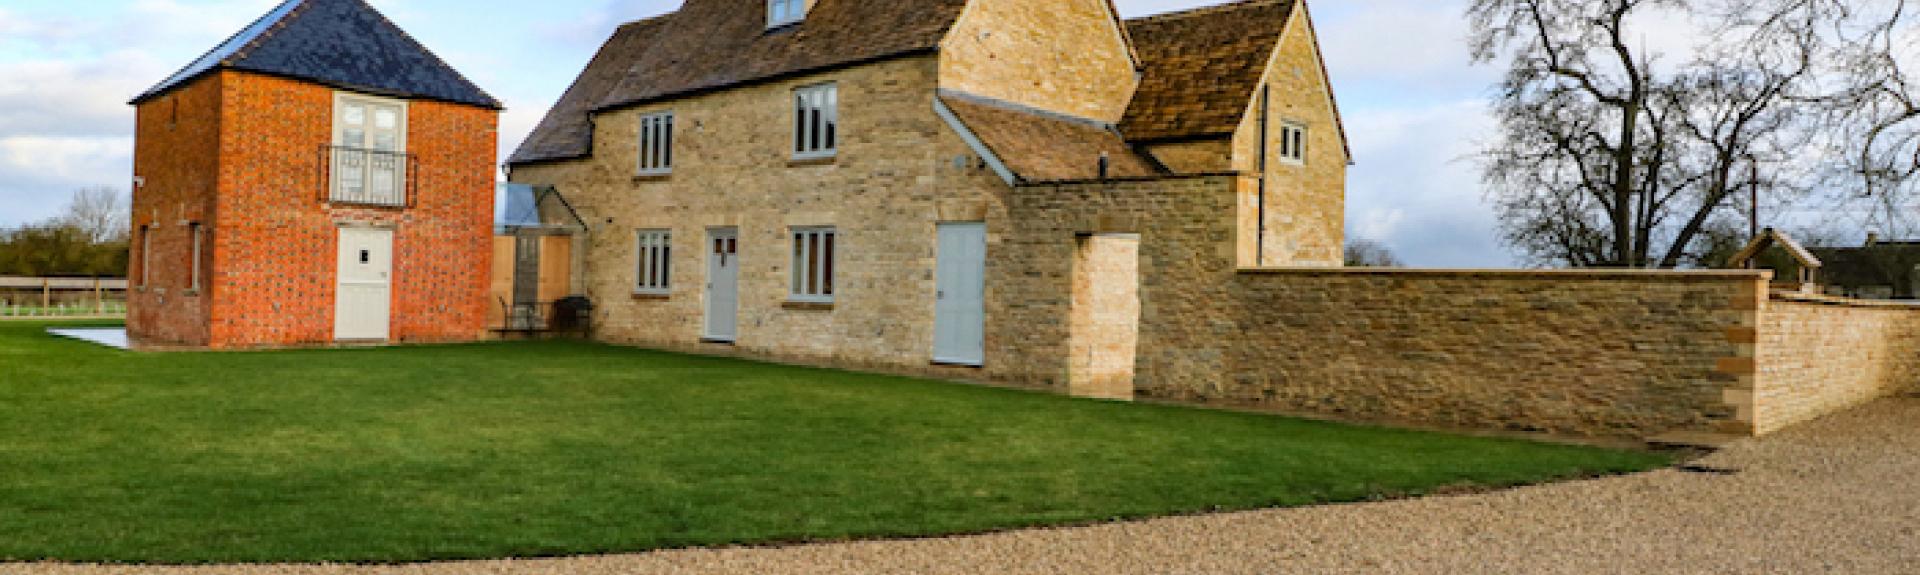 Exterior of a large stone-built, 3-storey Oxfordshire farmhouse and garden.